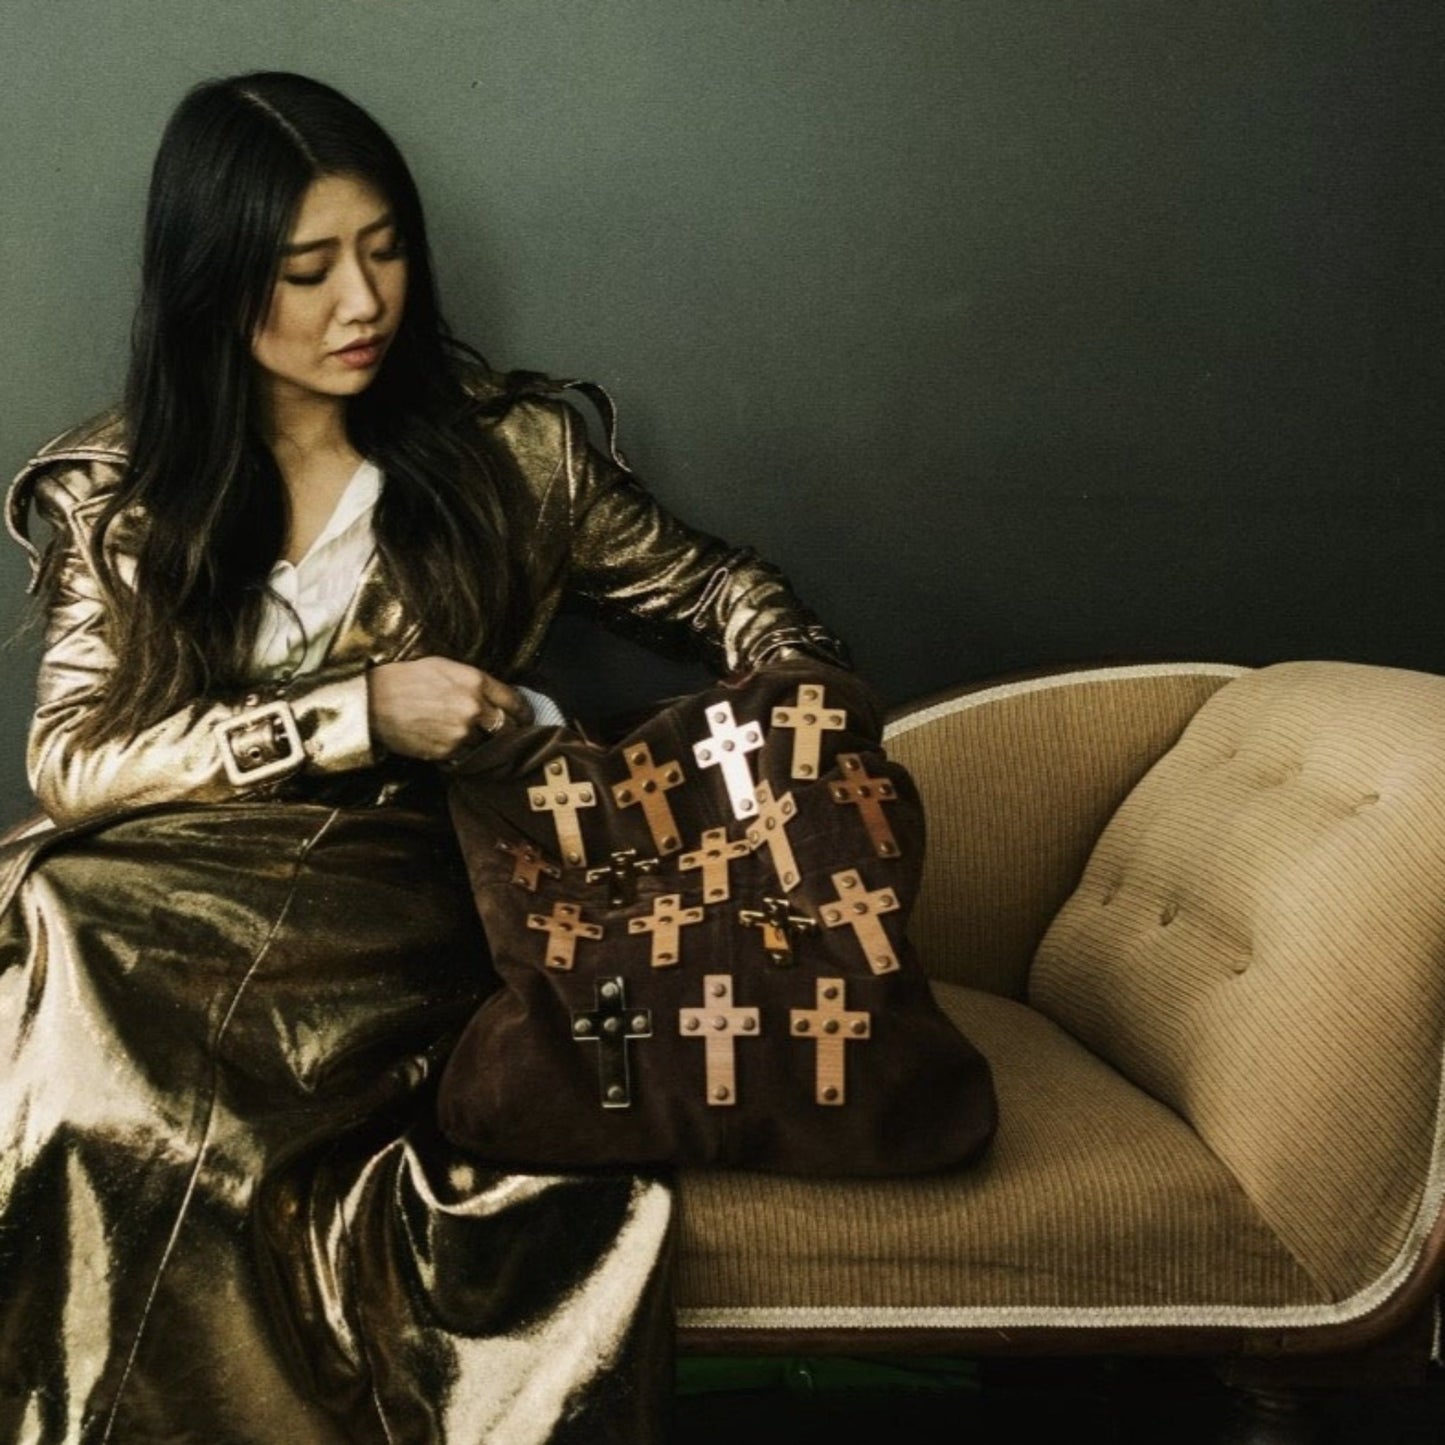 METANoIA The Cross Brown recycled leather tote handbag with cross shaped bamboo, walnut and metallic acrylic forms. Model featured browsing bag on a chaise lounge wearing a gold trench coat.